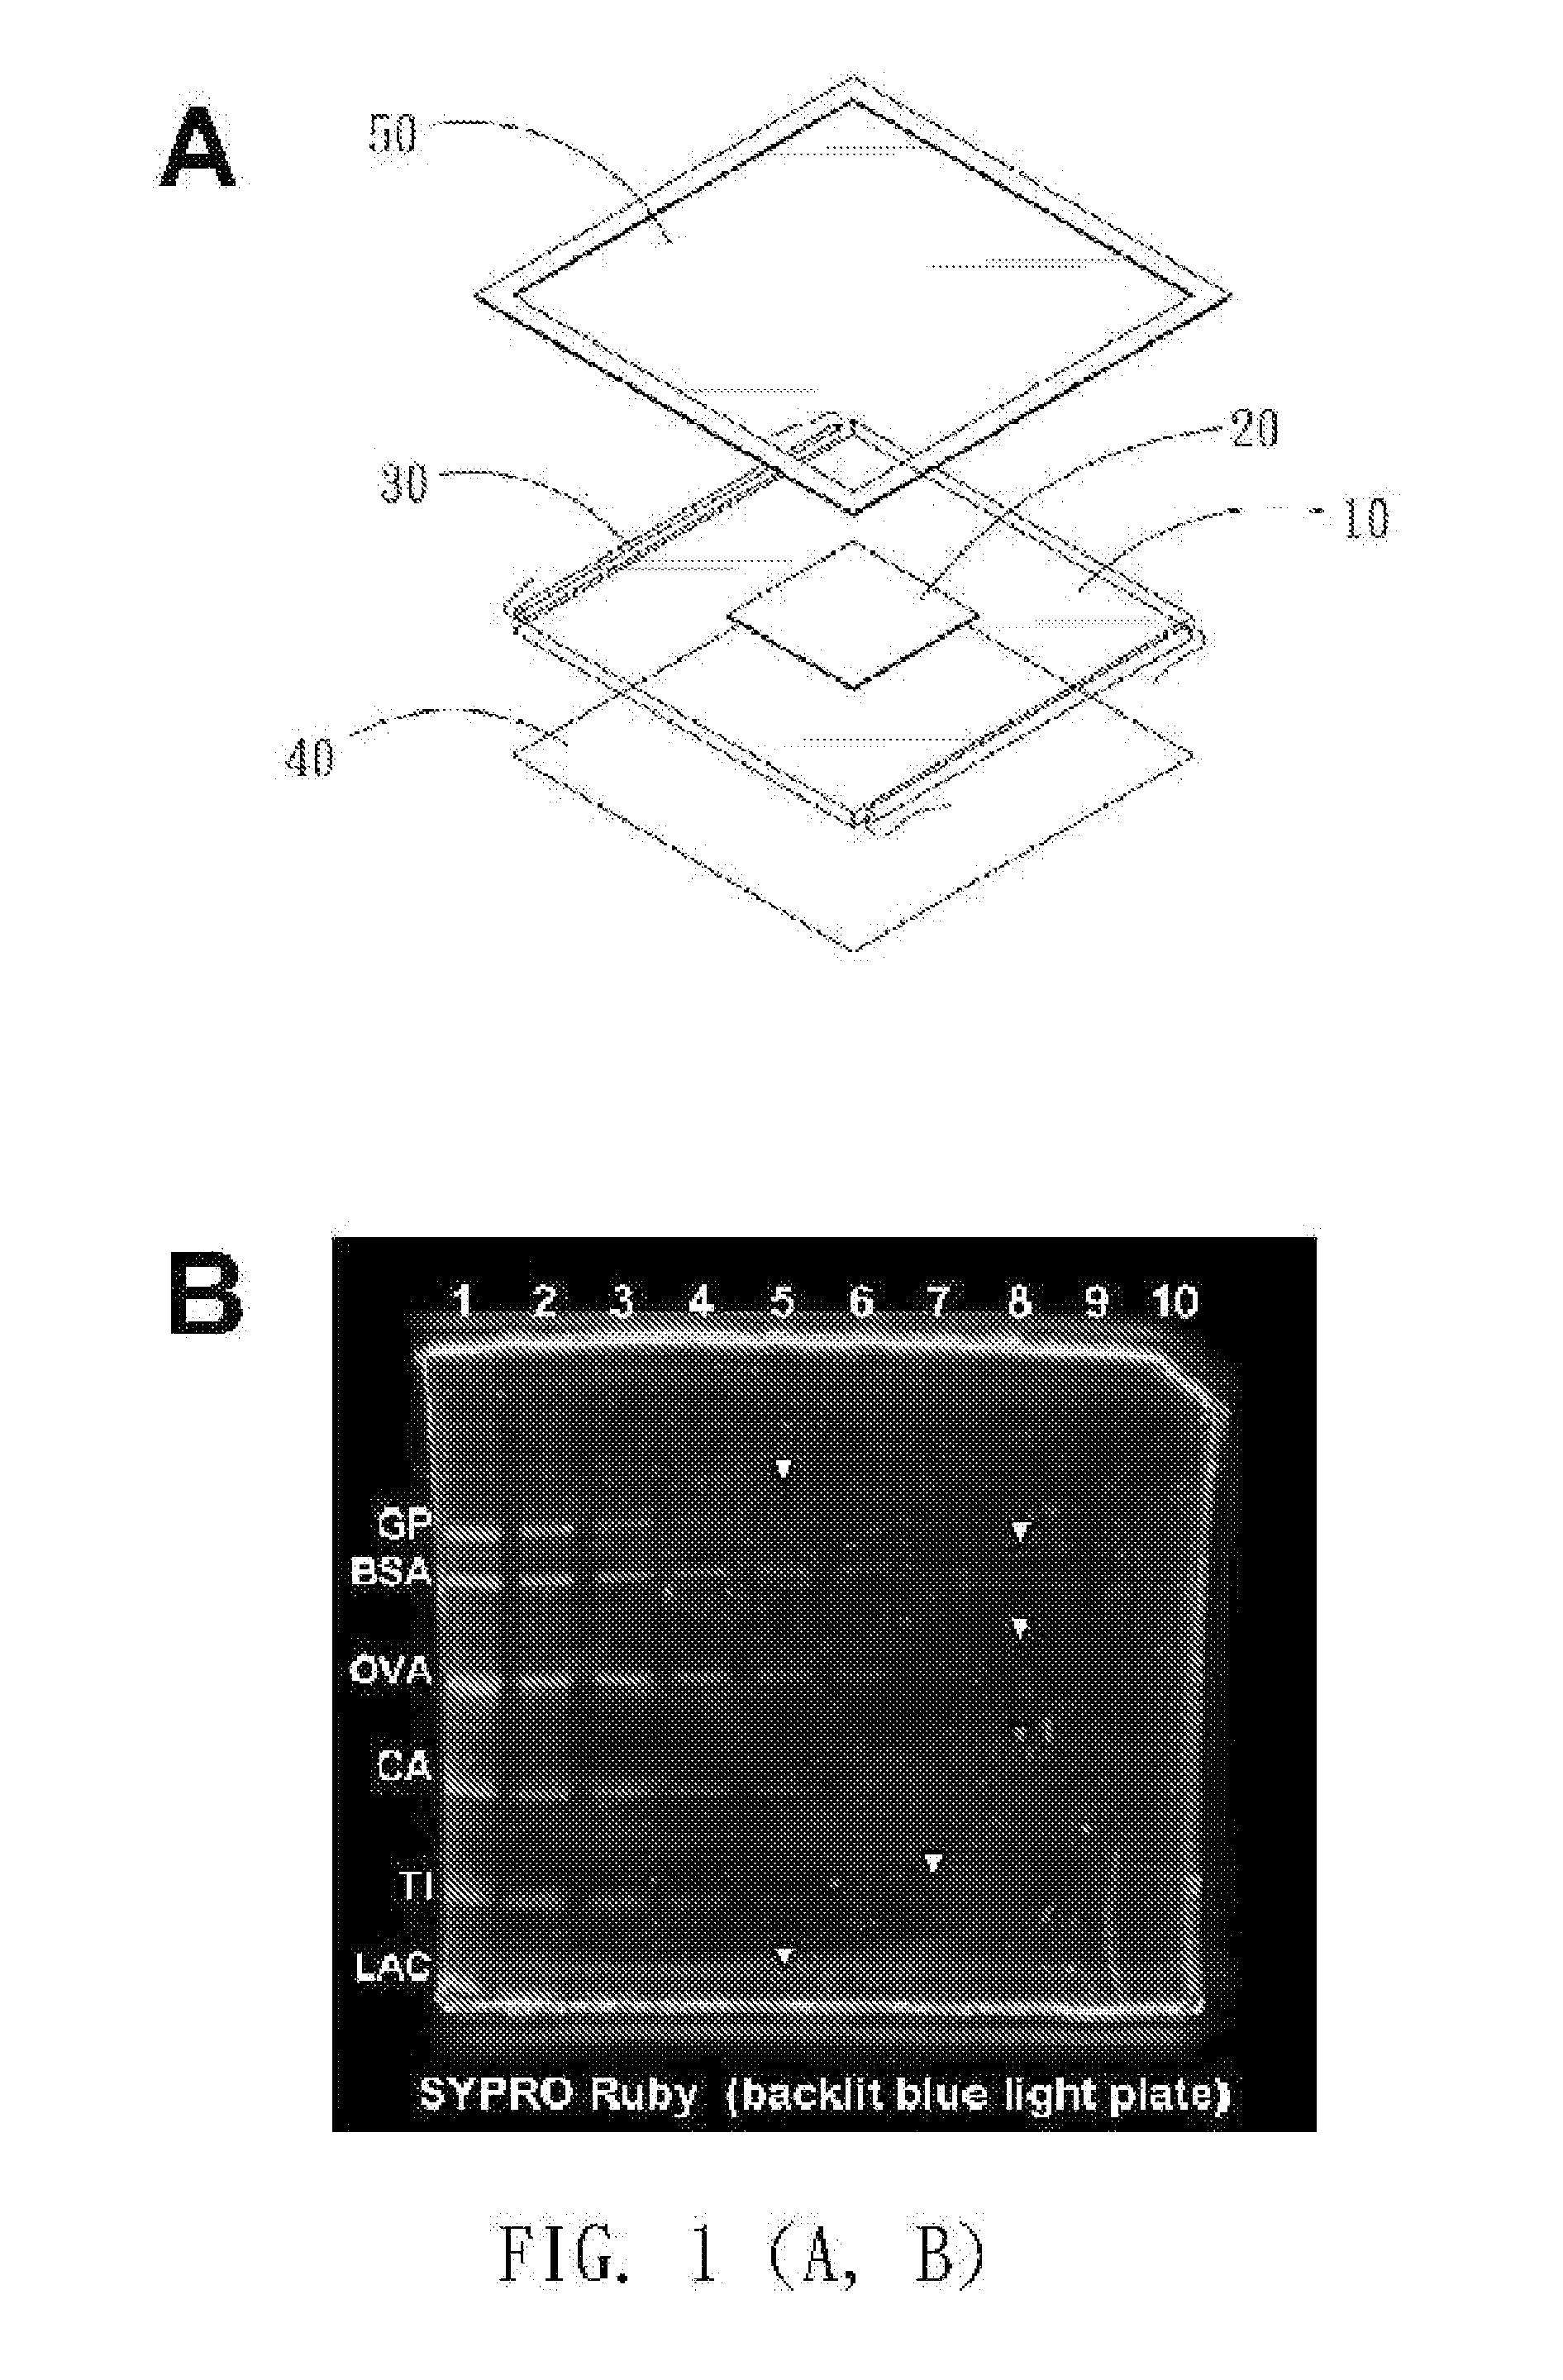 Device for exciting fluorescent samples using visible light or ultraviolet light